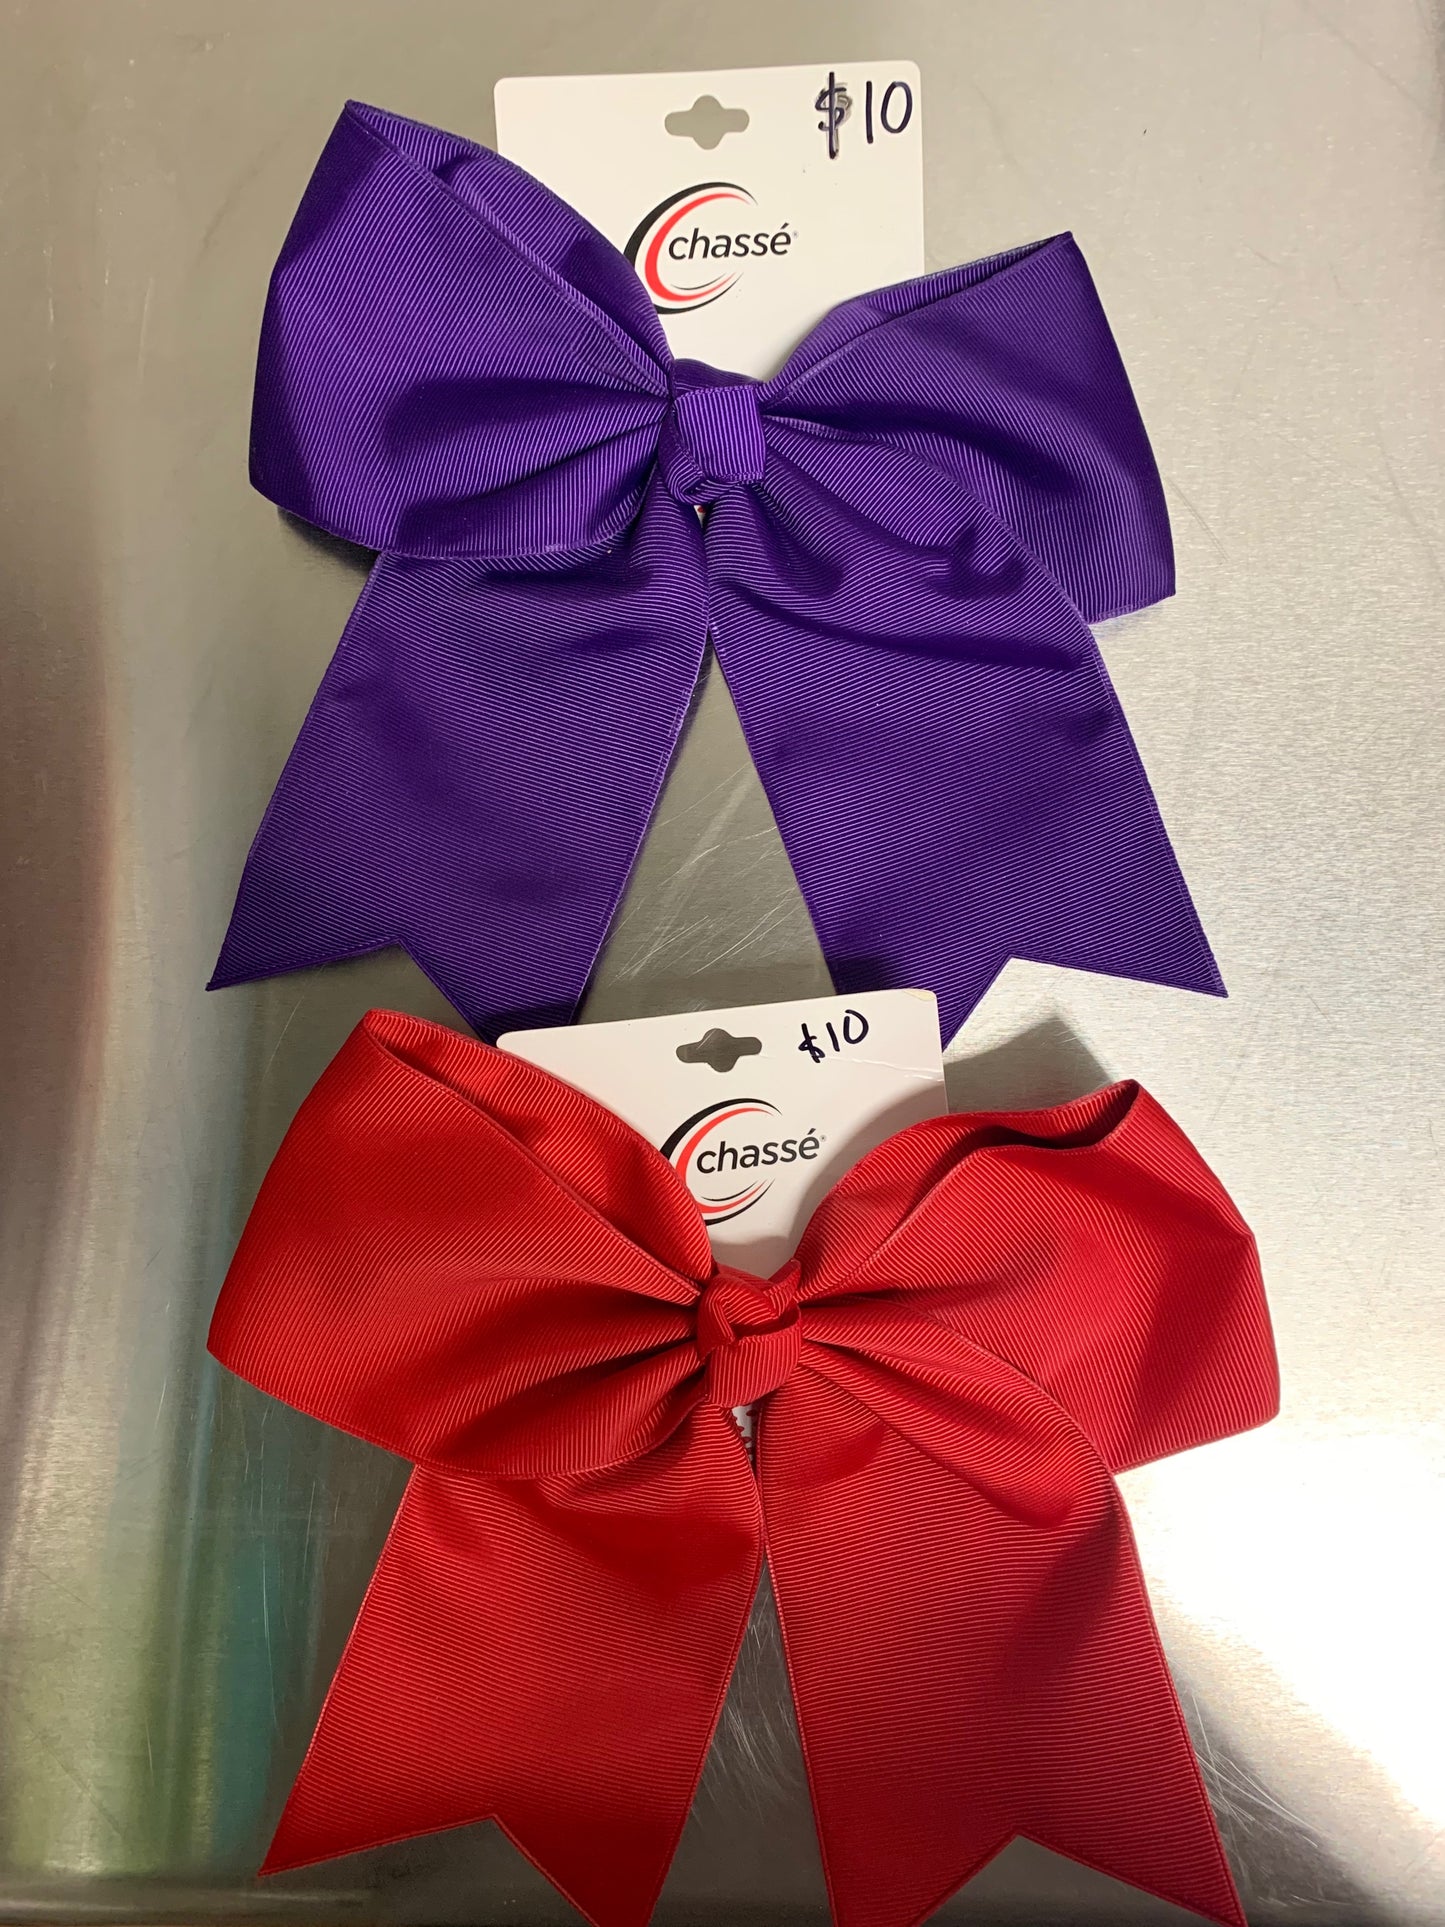 Chasse Cheer Bows